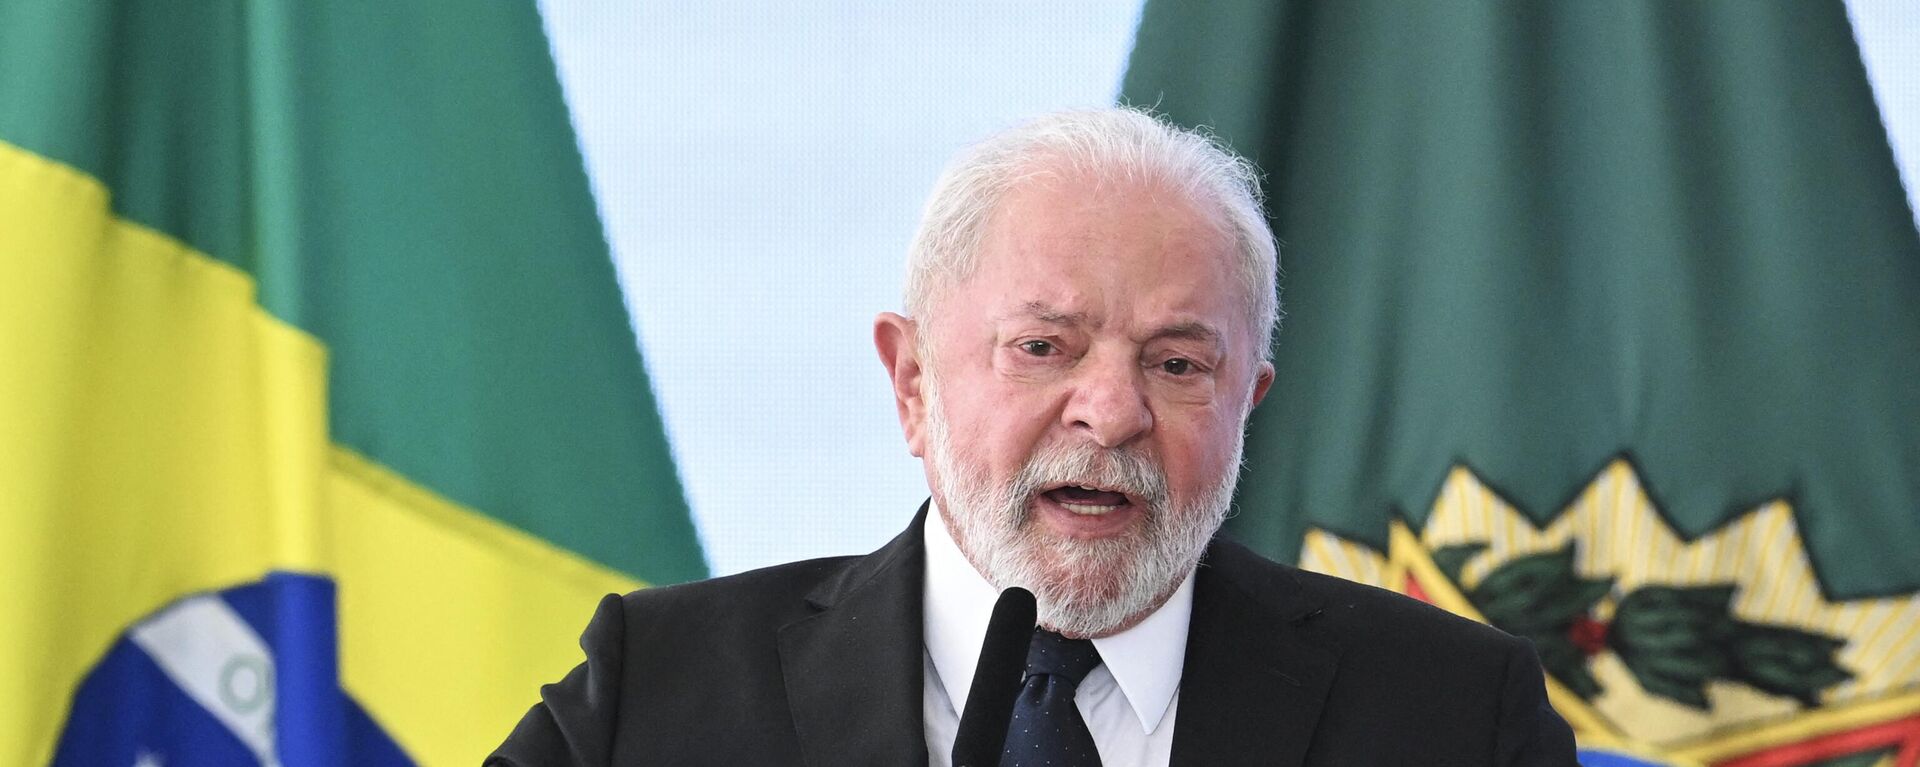 Brazilian President Luiz Inacio Lula da Silva delivers a speech during the launching ceremony of the National Public Security Program (PRONASCI) at the Planalto Palace in Brasilia on March 15, 2023 - Sputnik Africa, 1920, 16.04.2023